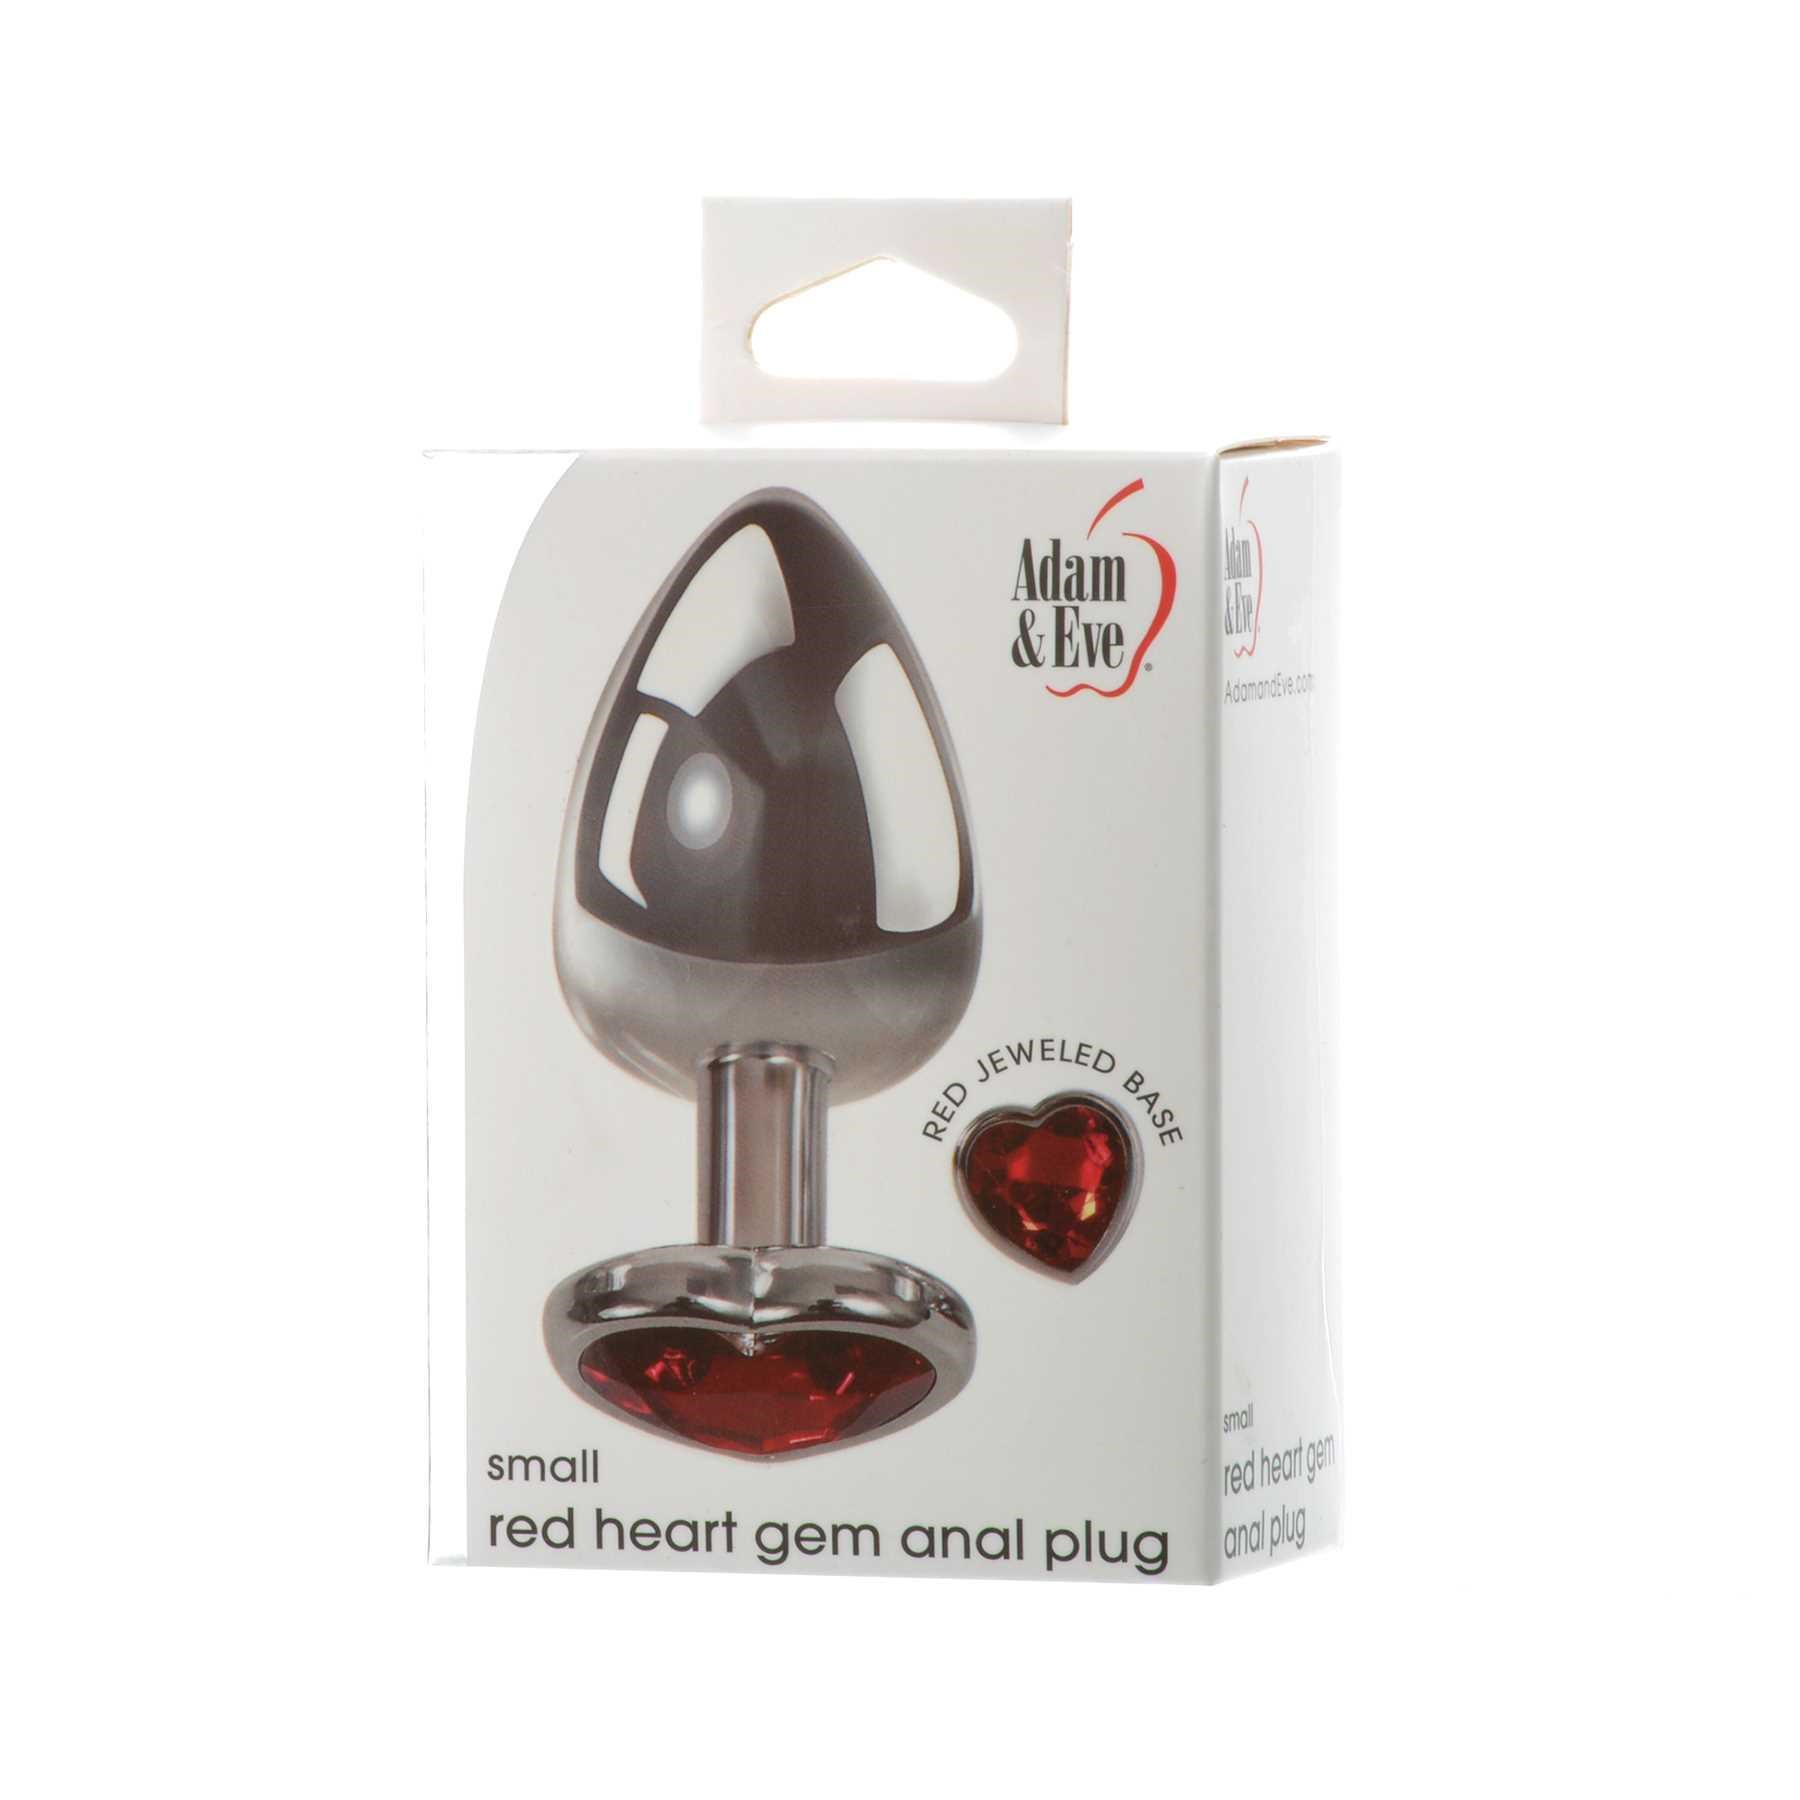 red hearts gem anal plug box packaging